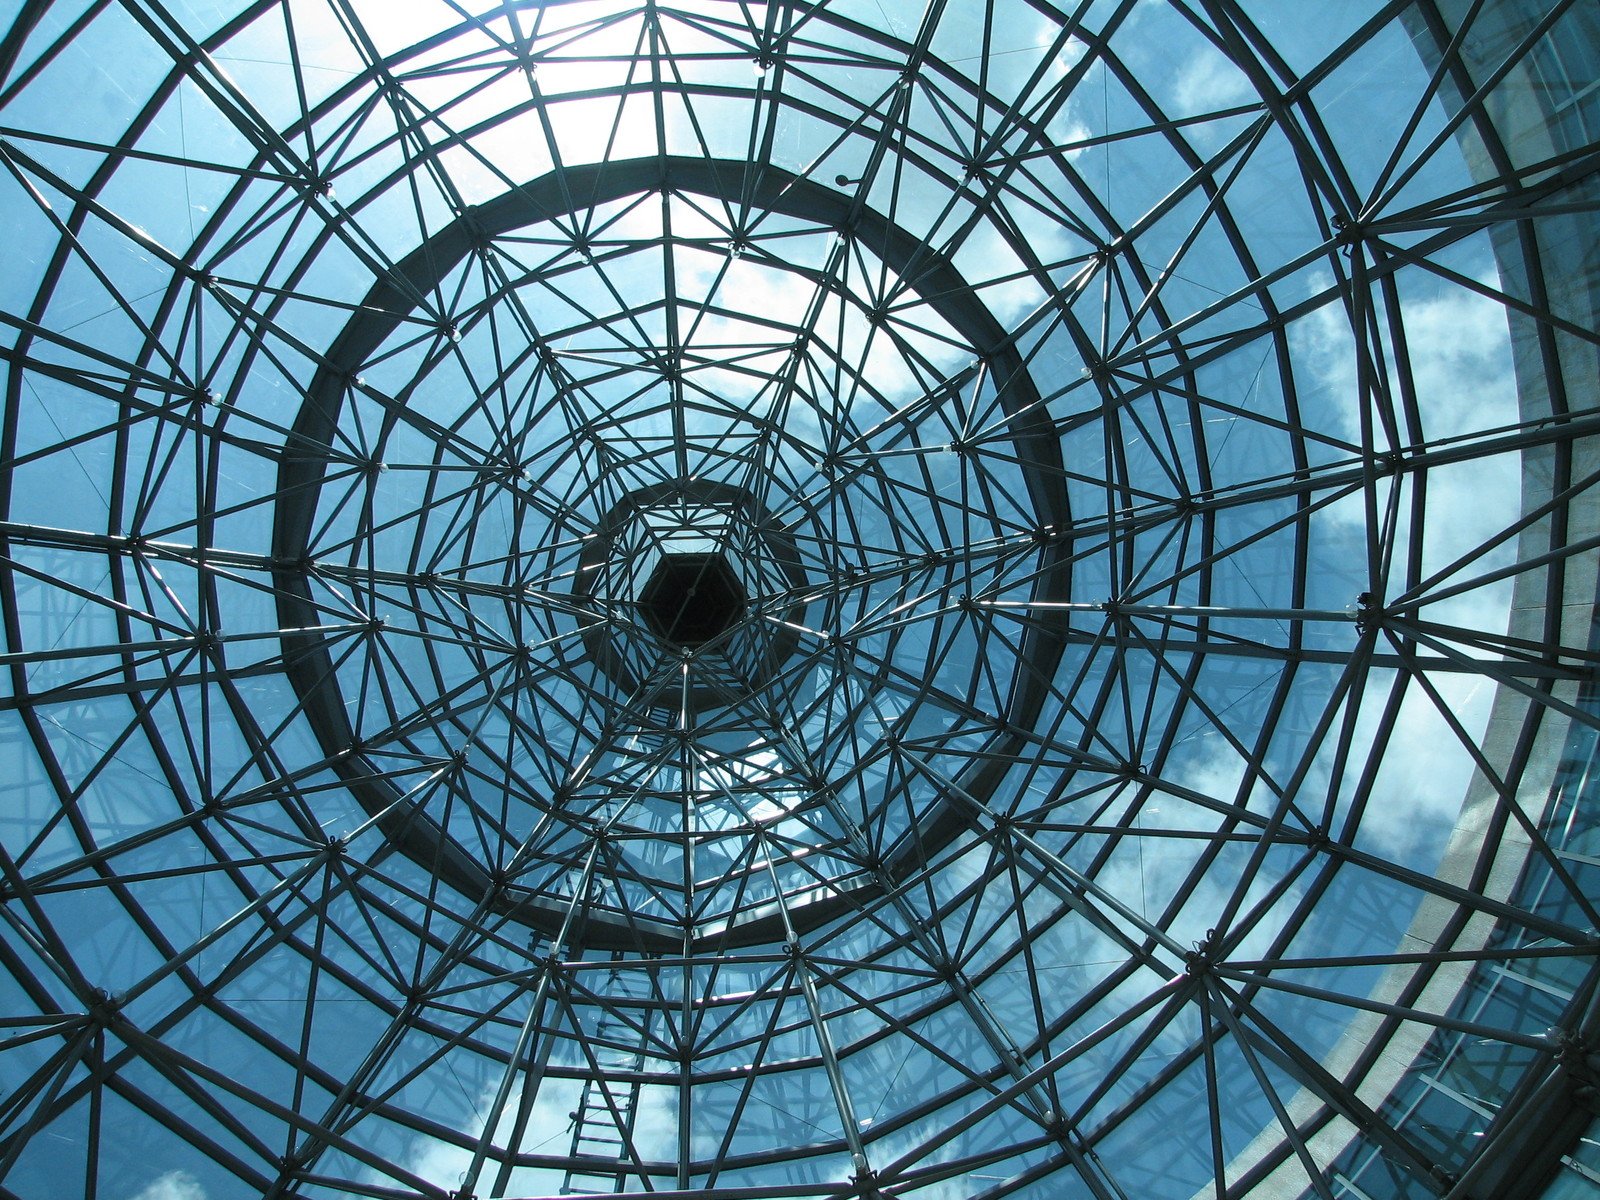 view from inside of a glass dome